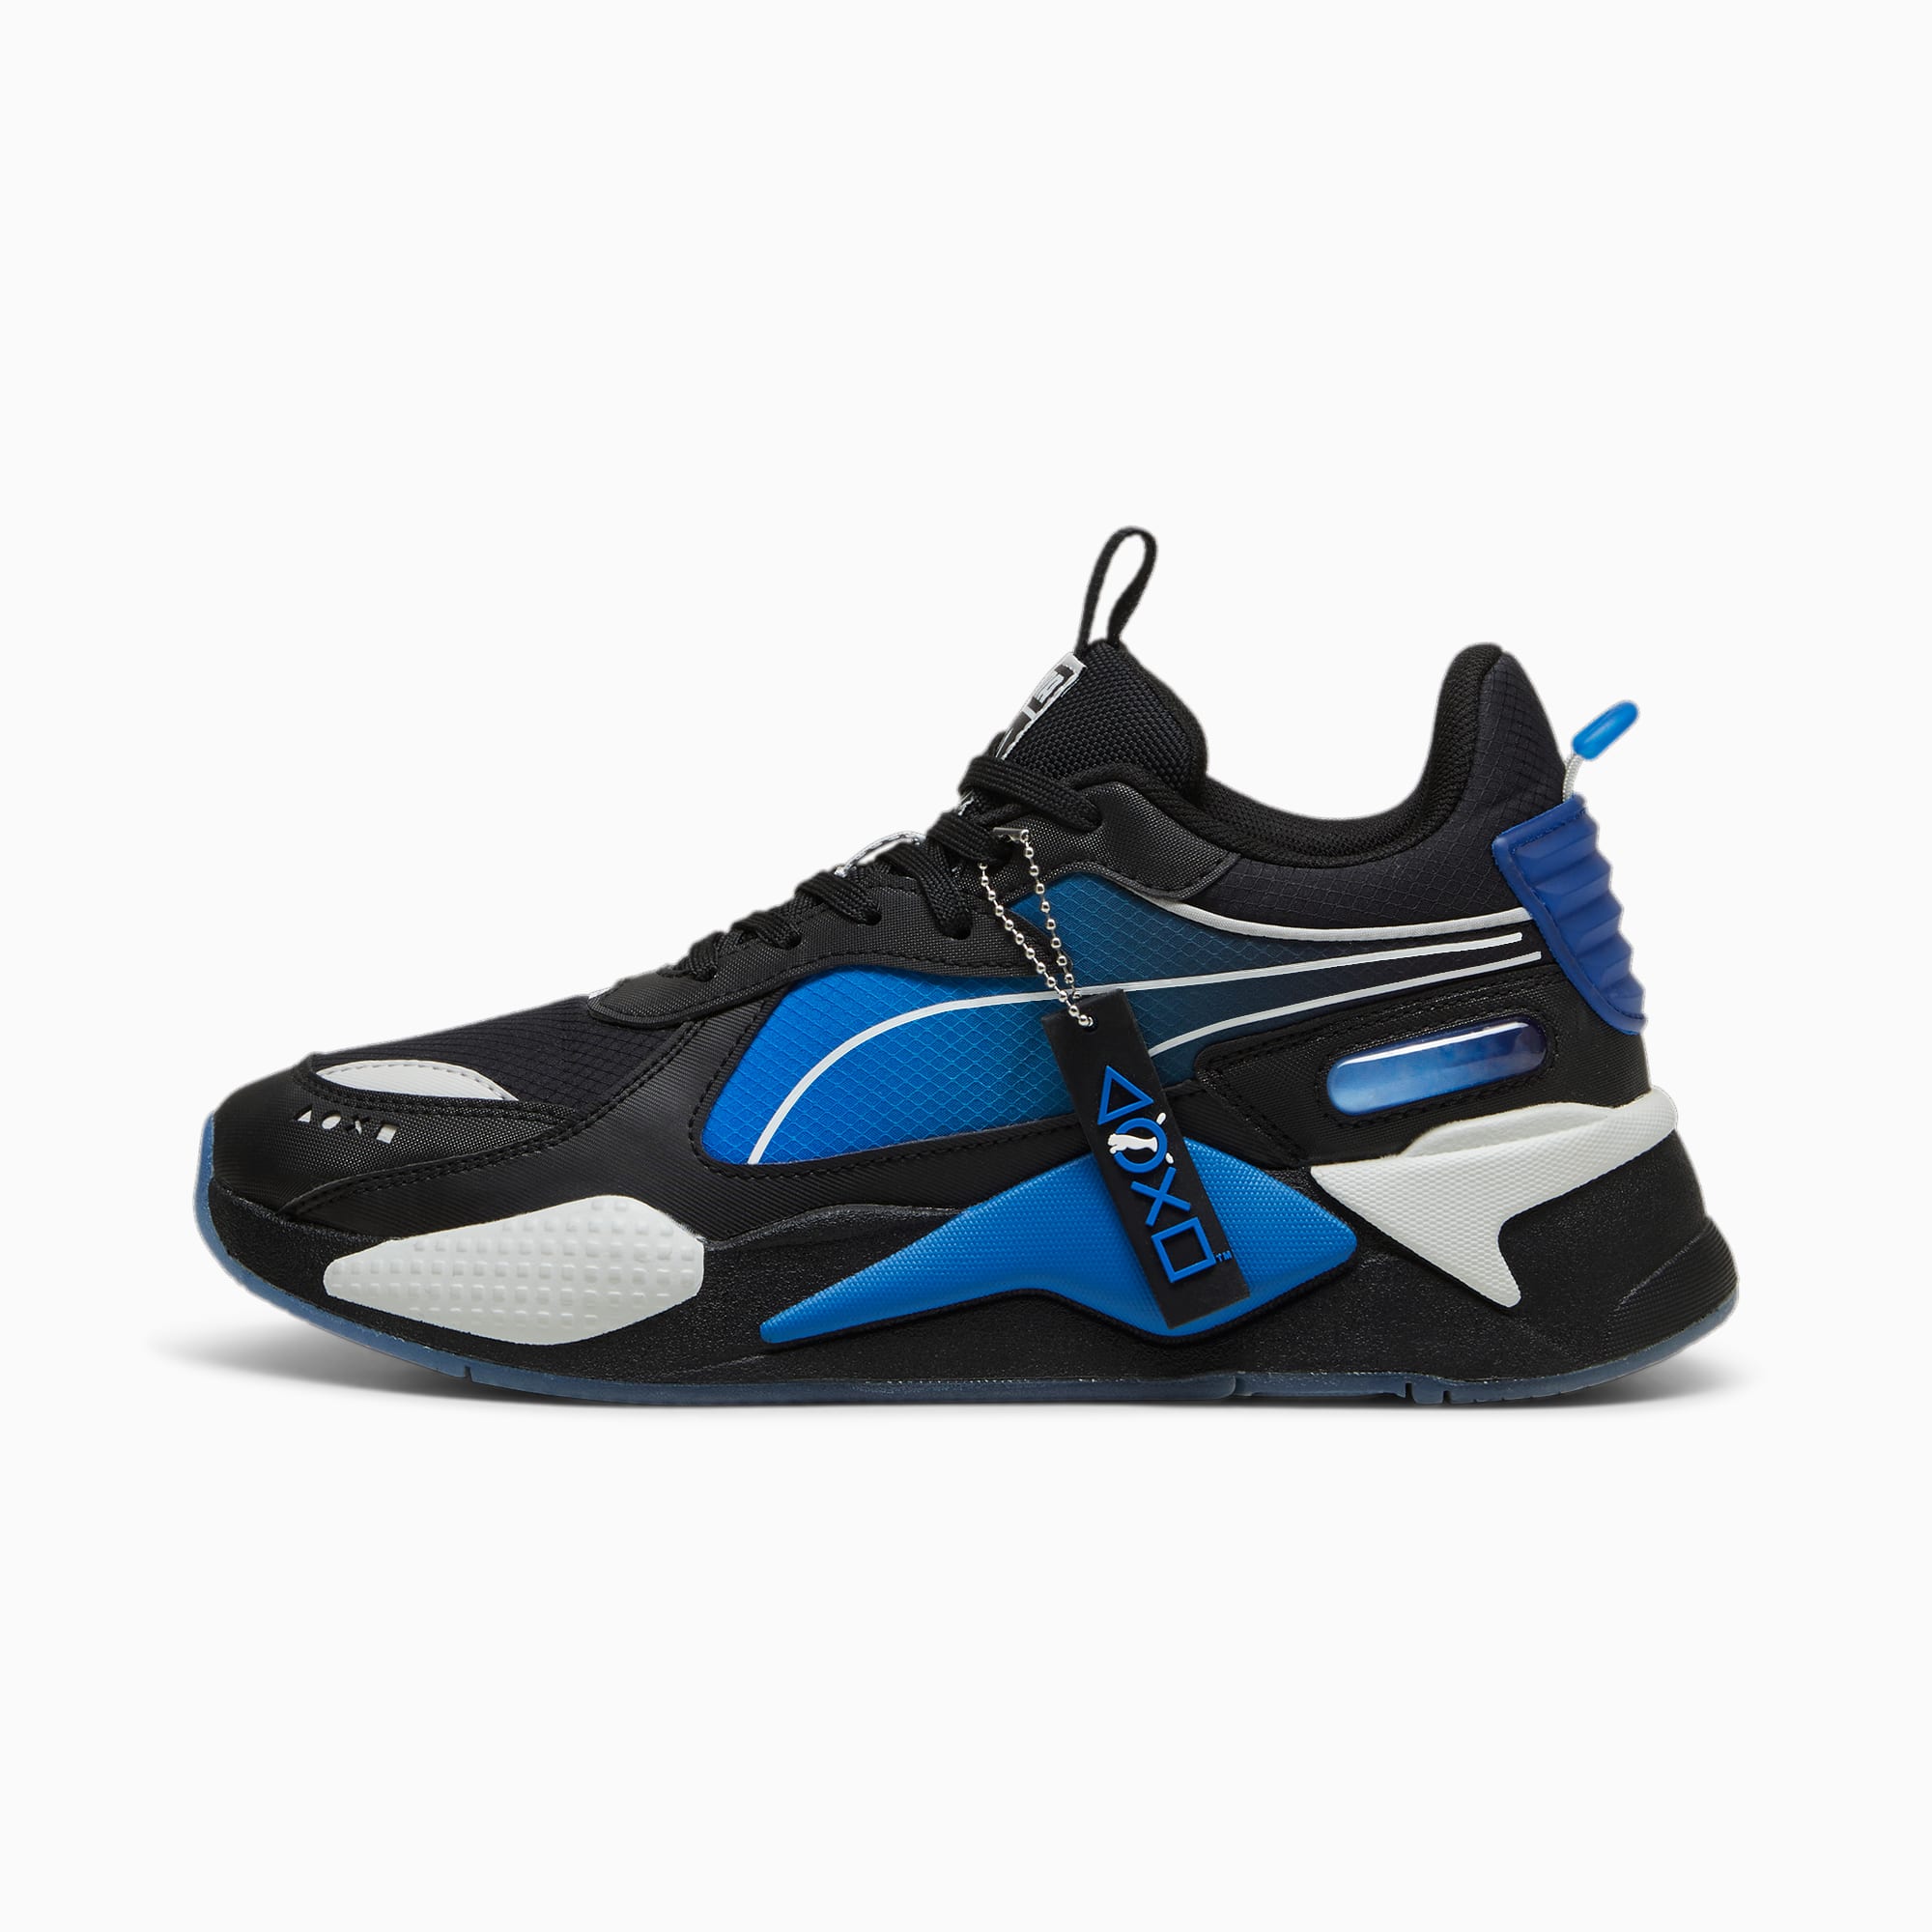 PUMA x PLAYSTATION RS-X Sneakers